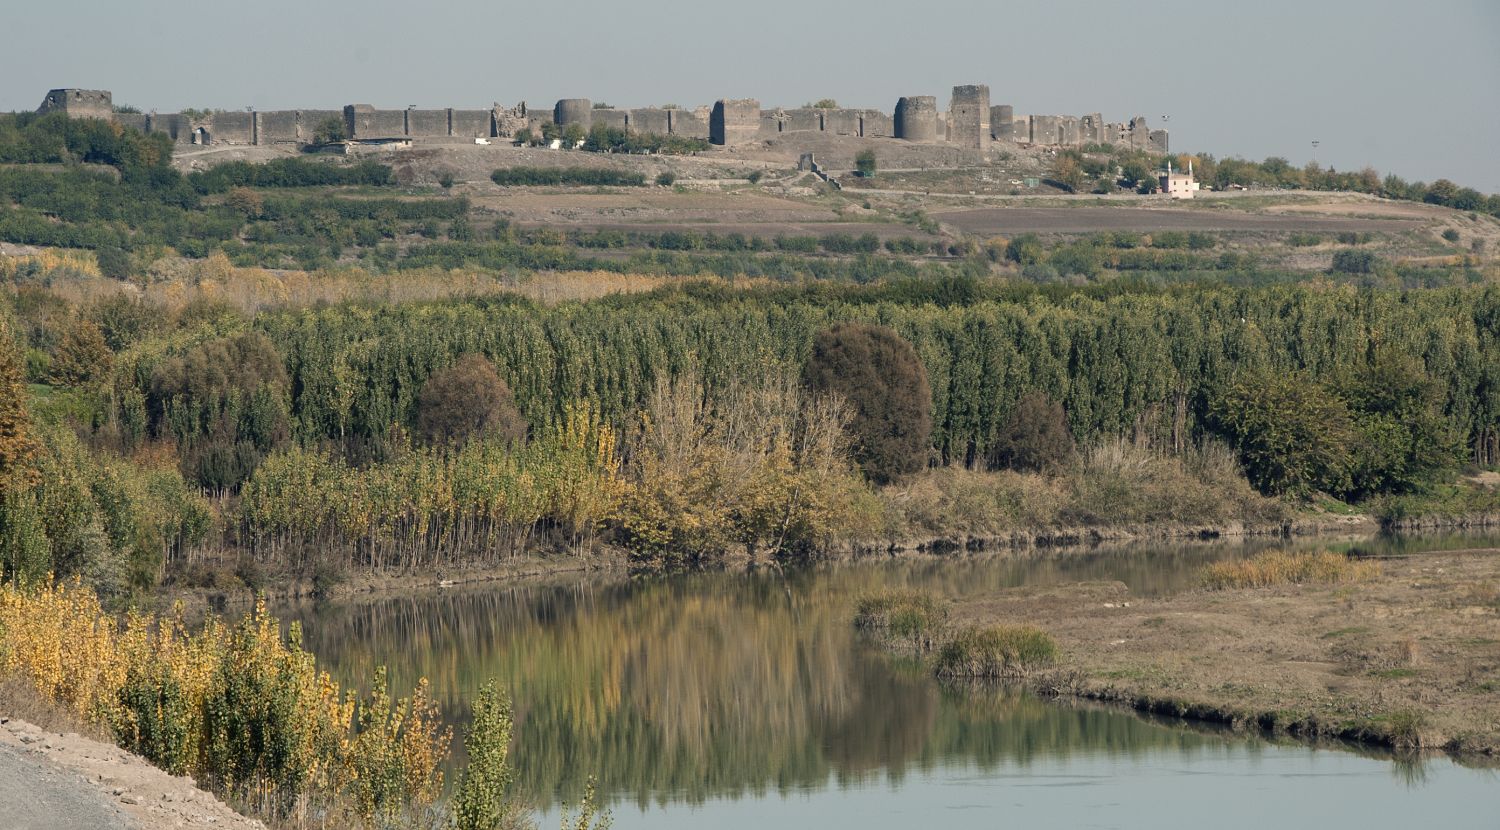 Diyarbakır Kalesi ve Surları - View of city walls on east side from the River Tigris at the bridge known as Ongözlü Köprü. The riverfront gardens known as&nbsp;Hevsel Bahçeleri are visible in the foreground.&nbsp;